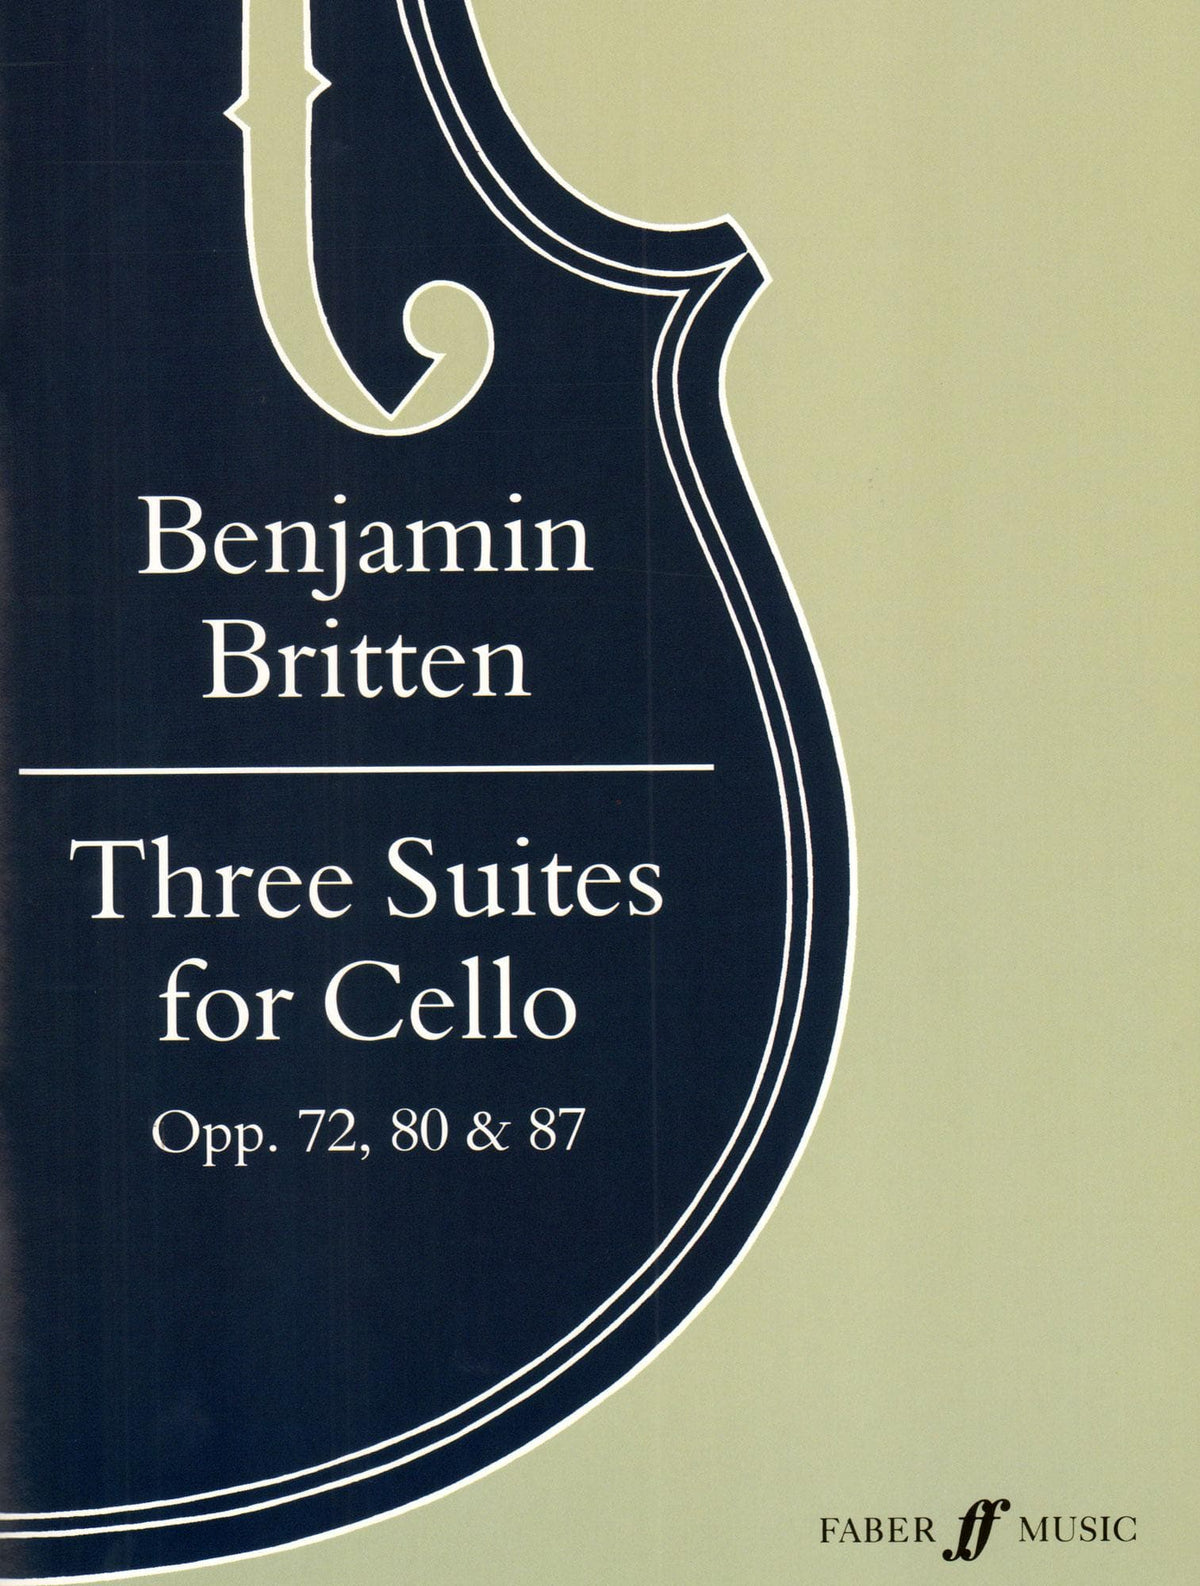 Britten, Benjamin - 3 Suites For Cello Op 72 , 80 , and 87 for Cello - Edited by Rostropovich - Faber Music Publication